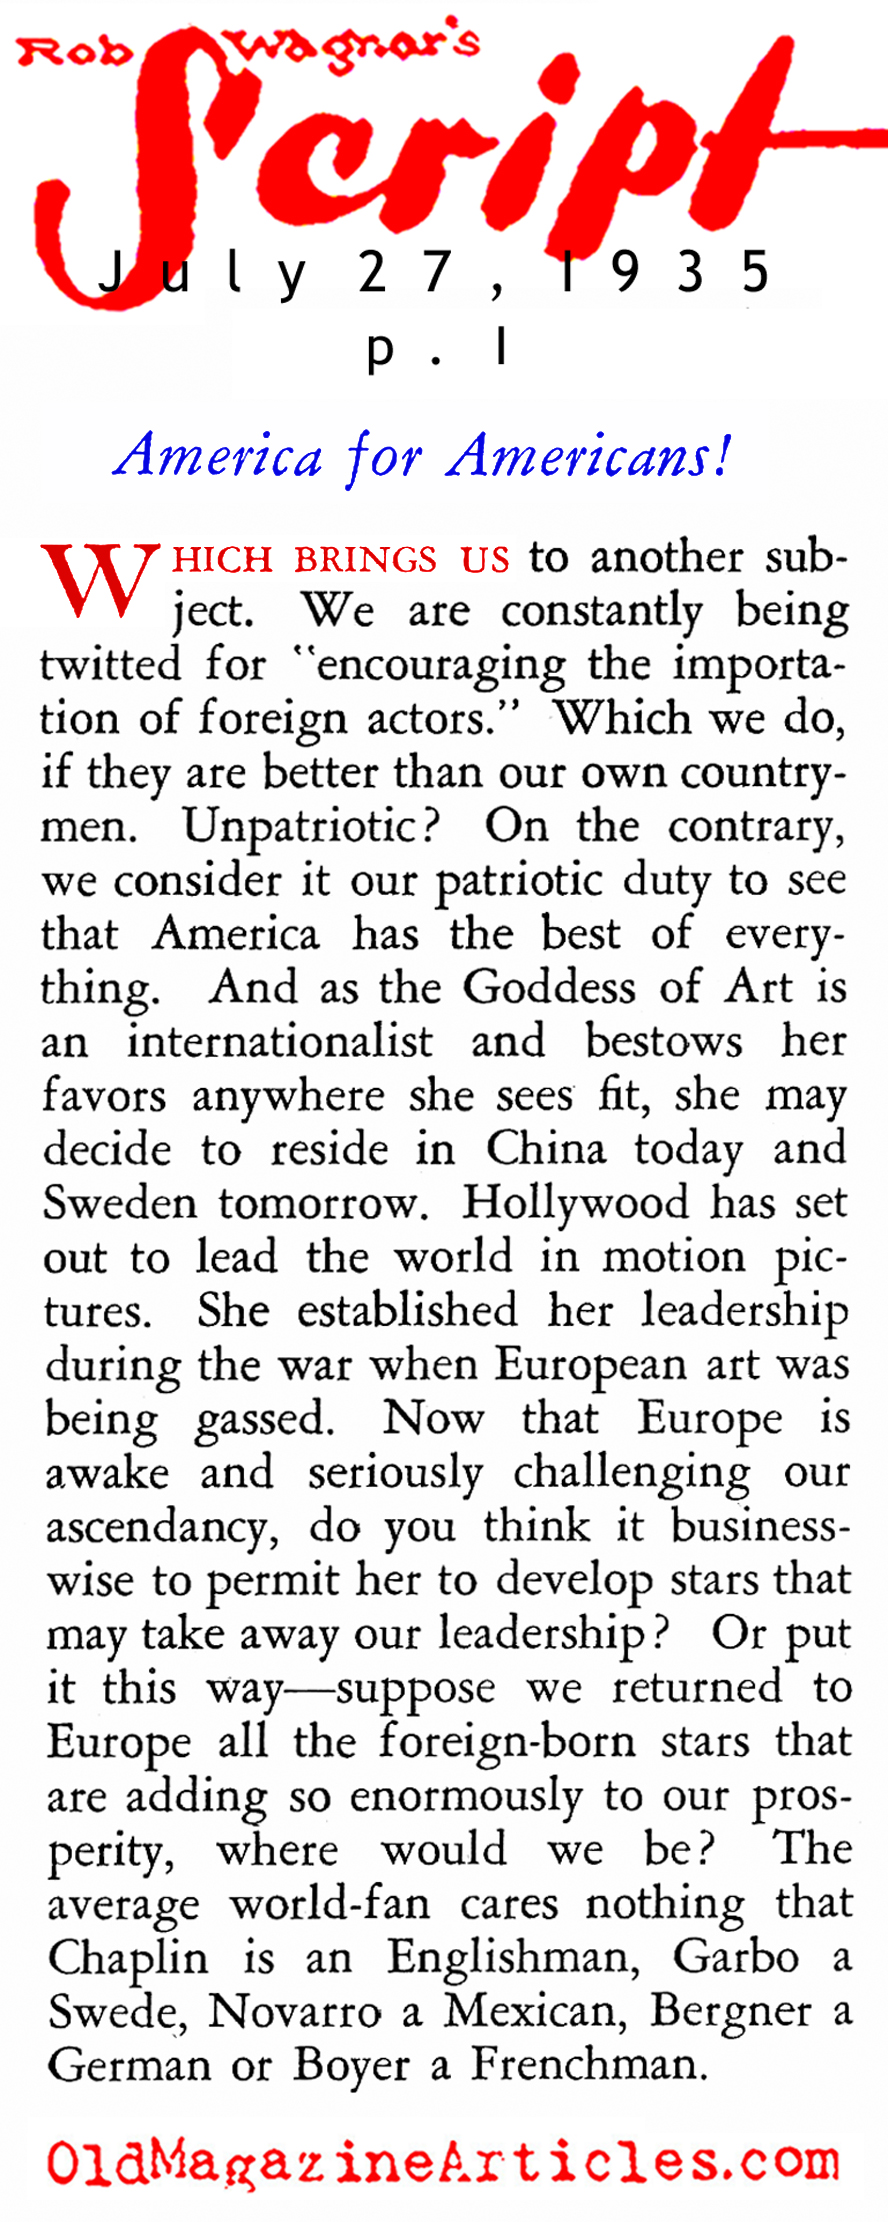 Immigration Hollywood-Style (Rob Wagner's Script, 1935)